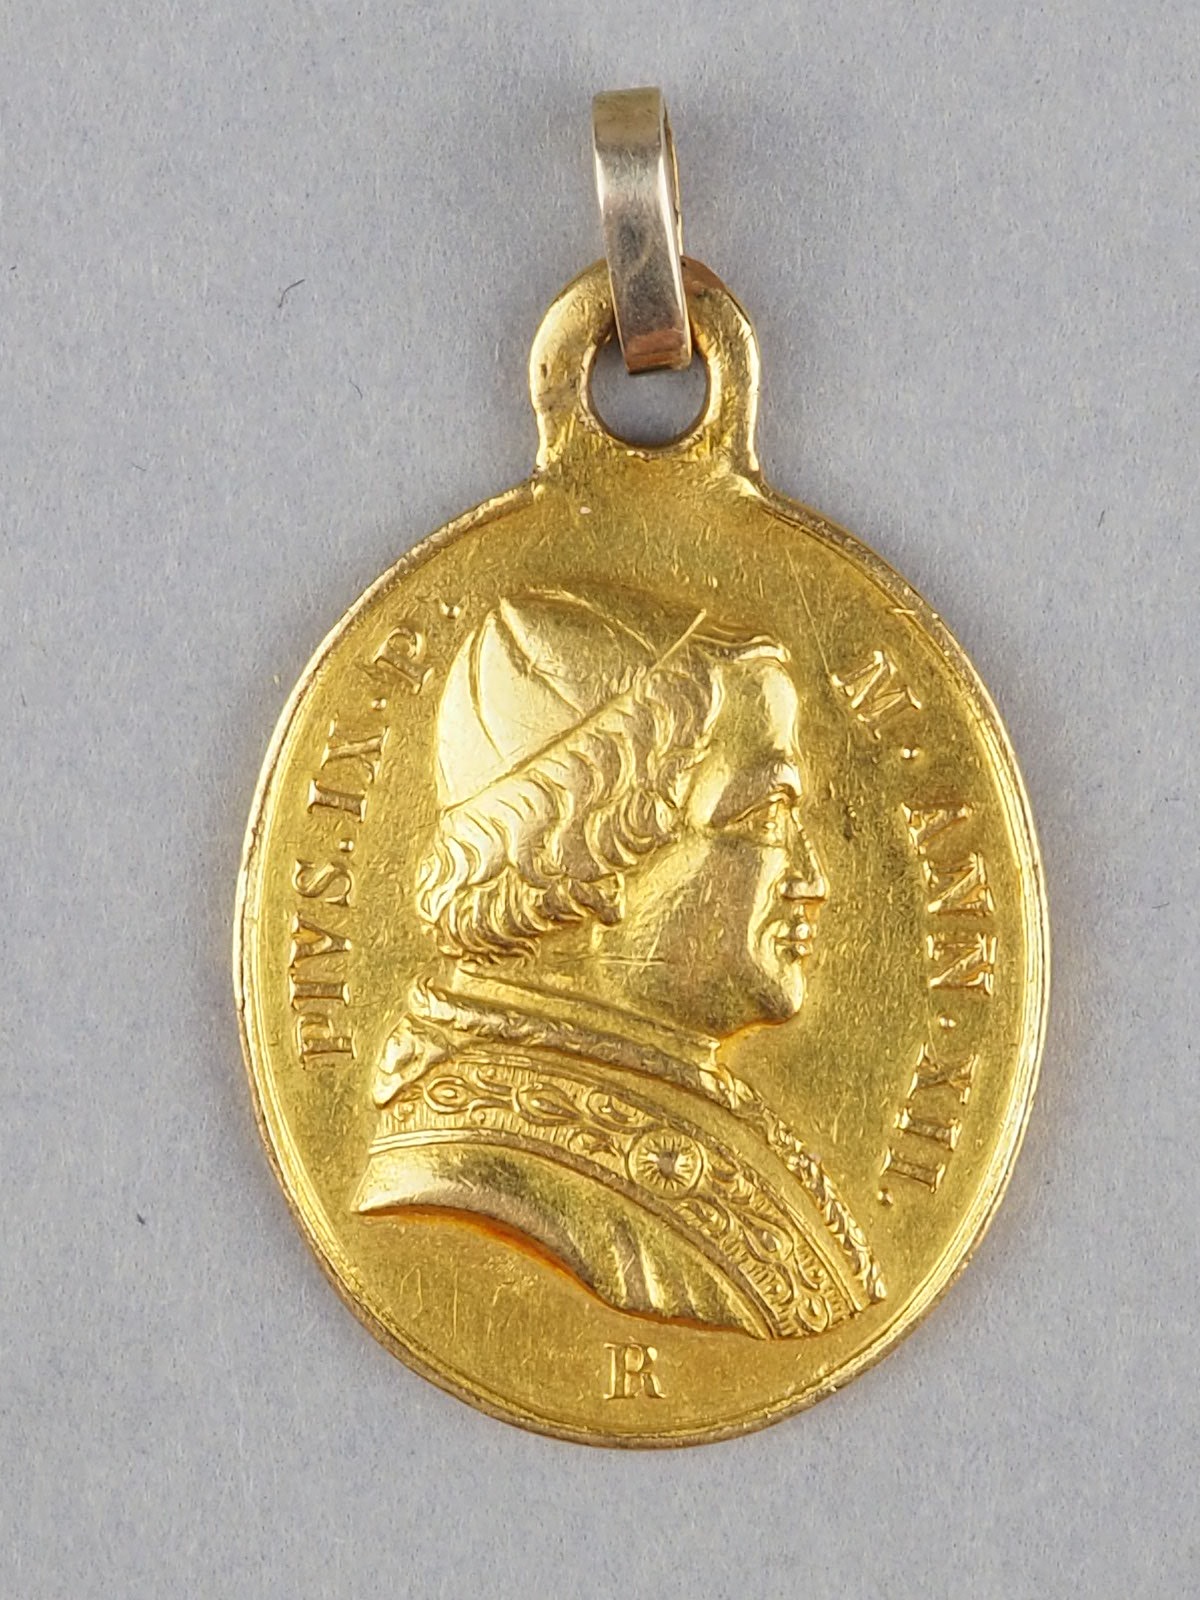 Miraculous medal, 18kt gold, Italy circa 1858 - Pope Pius IX.